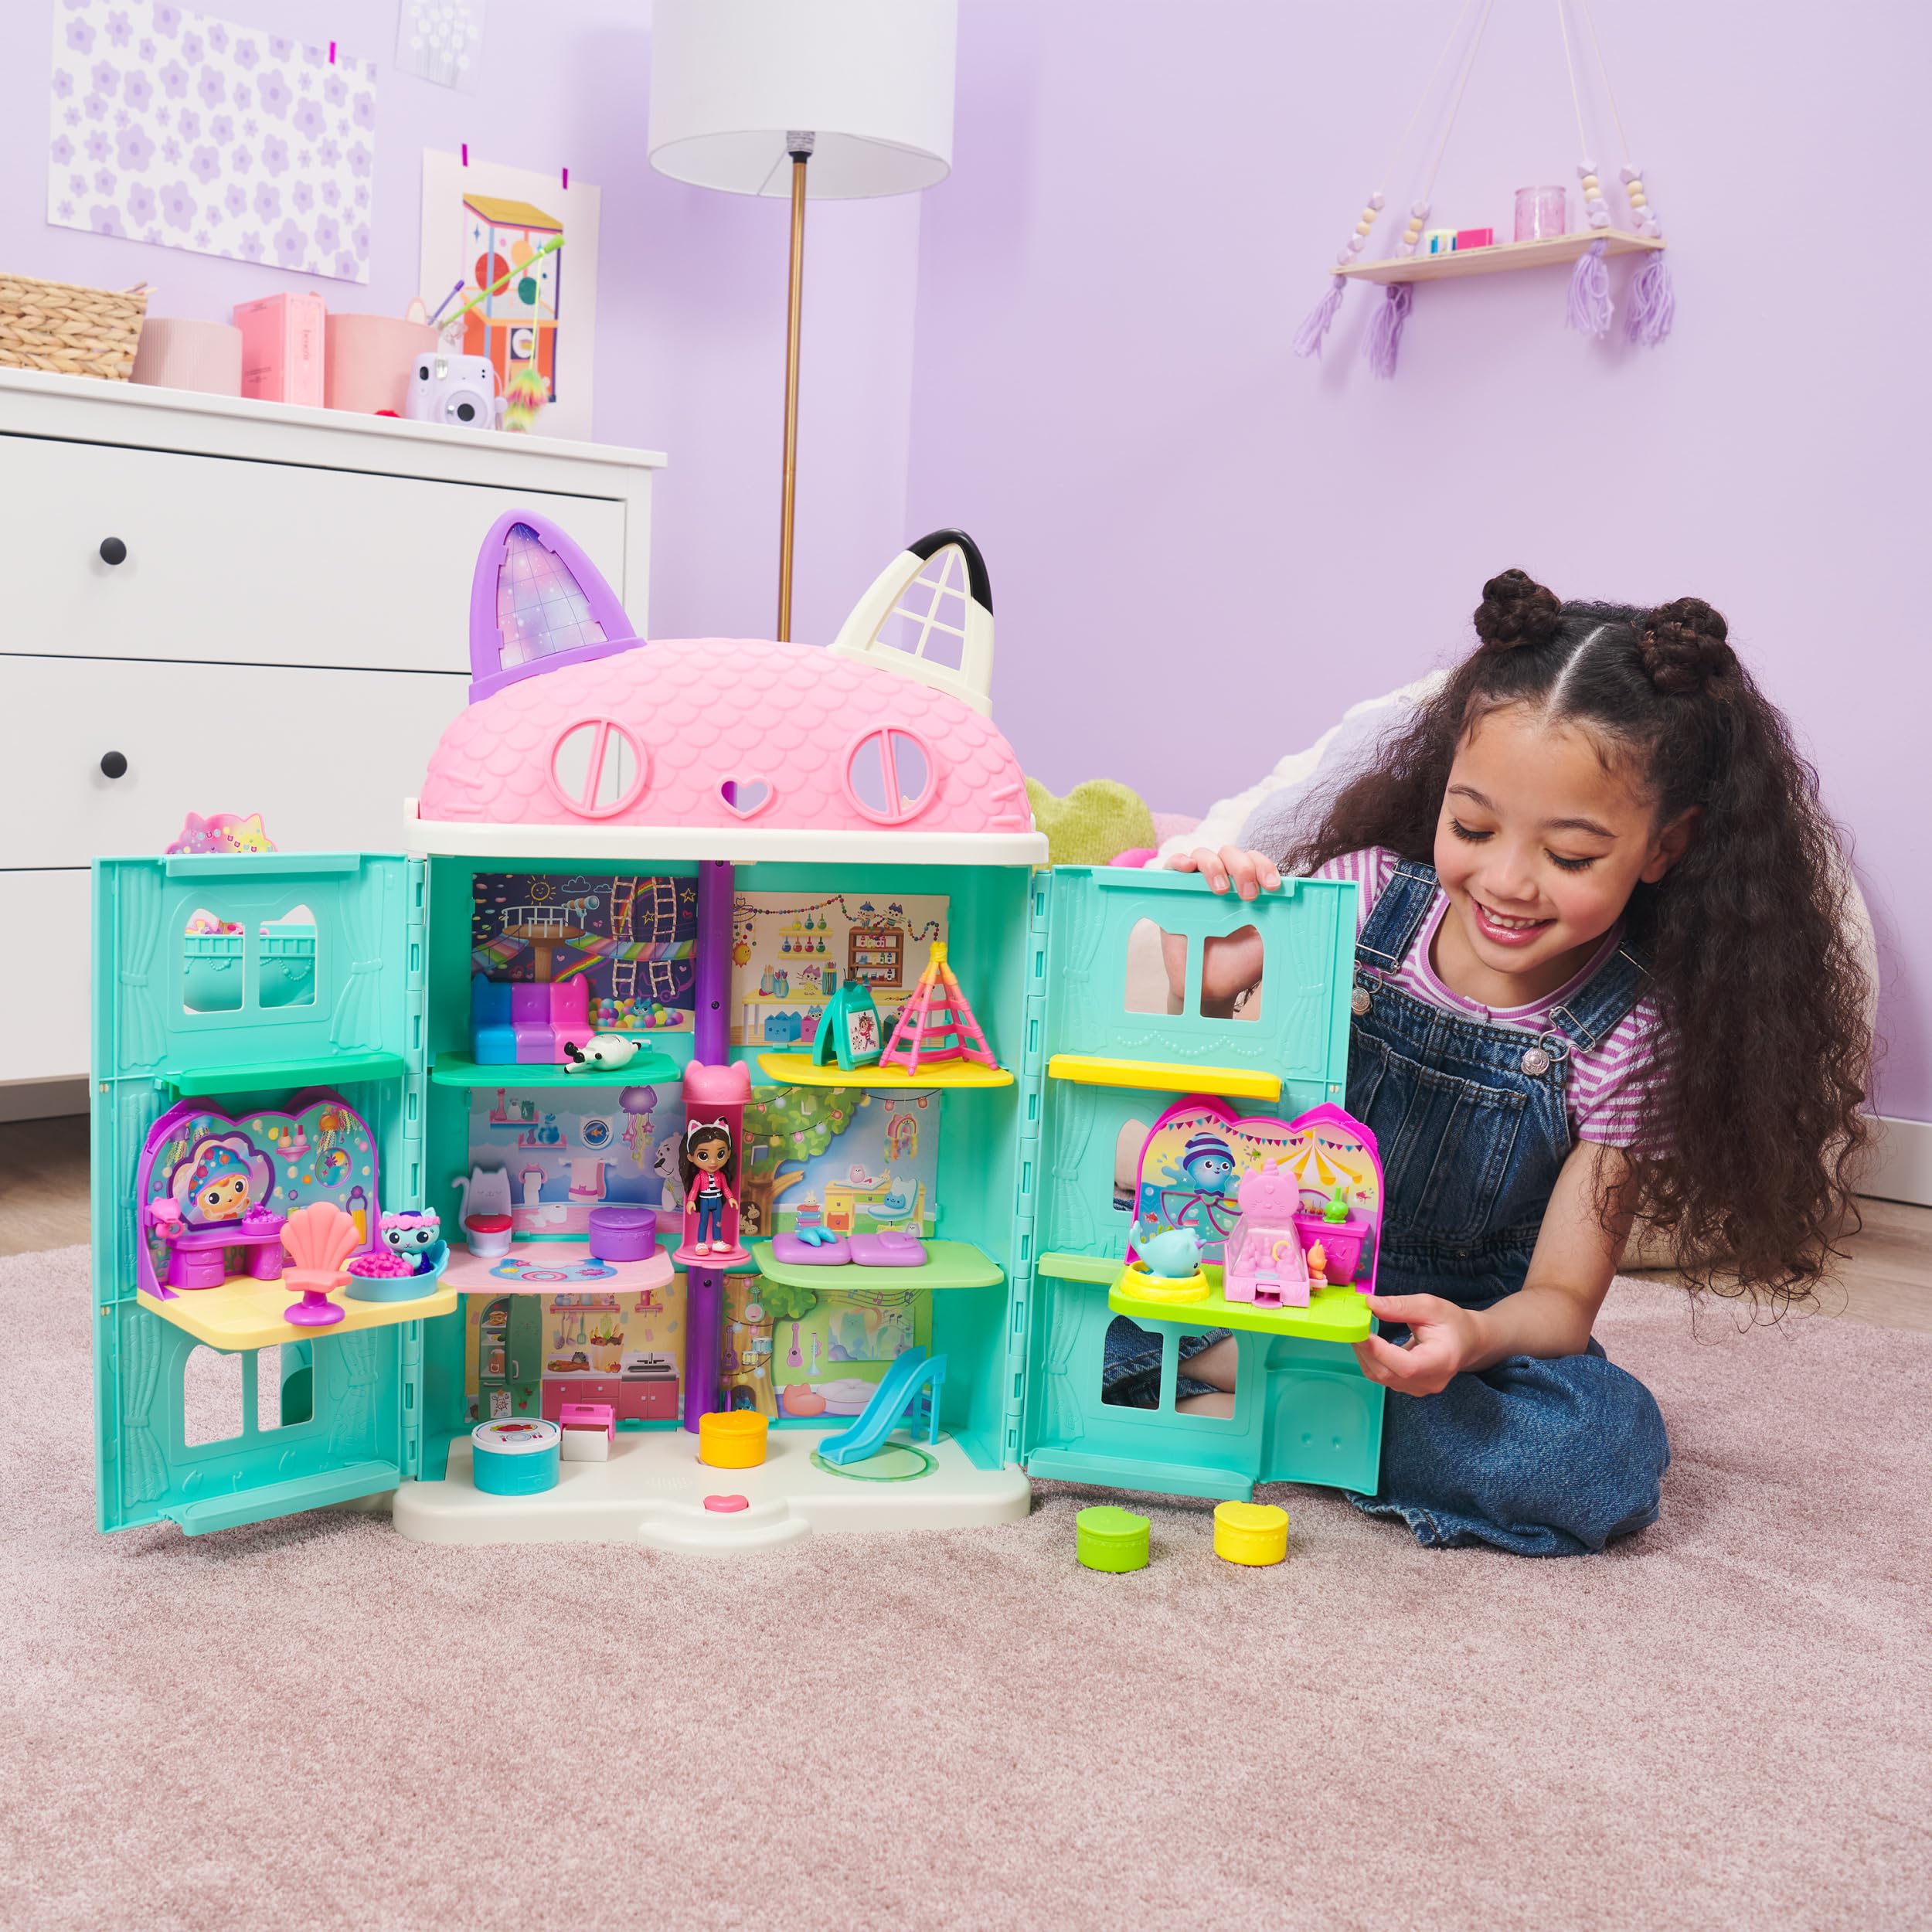 Gabby's Dollhouse DreamWorks, Mercat’s Spa Room Playset, with Mercat Toy Figure, Surprise Toys and Dollhouse Furniture, Kids Toys for Girls & Boys 3+